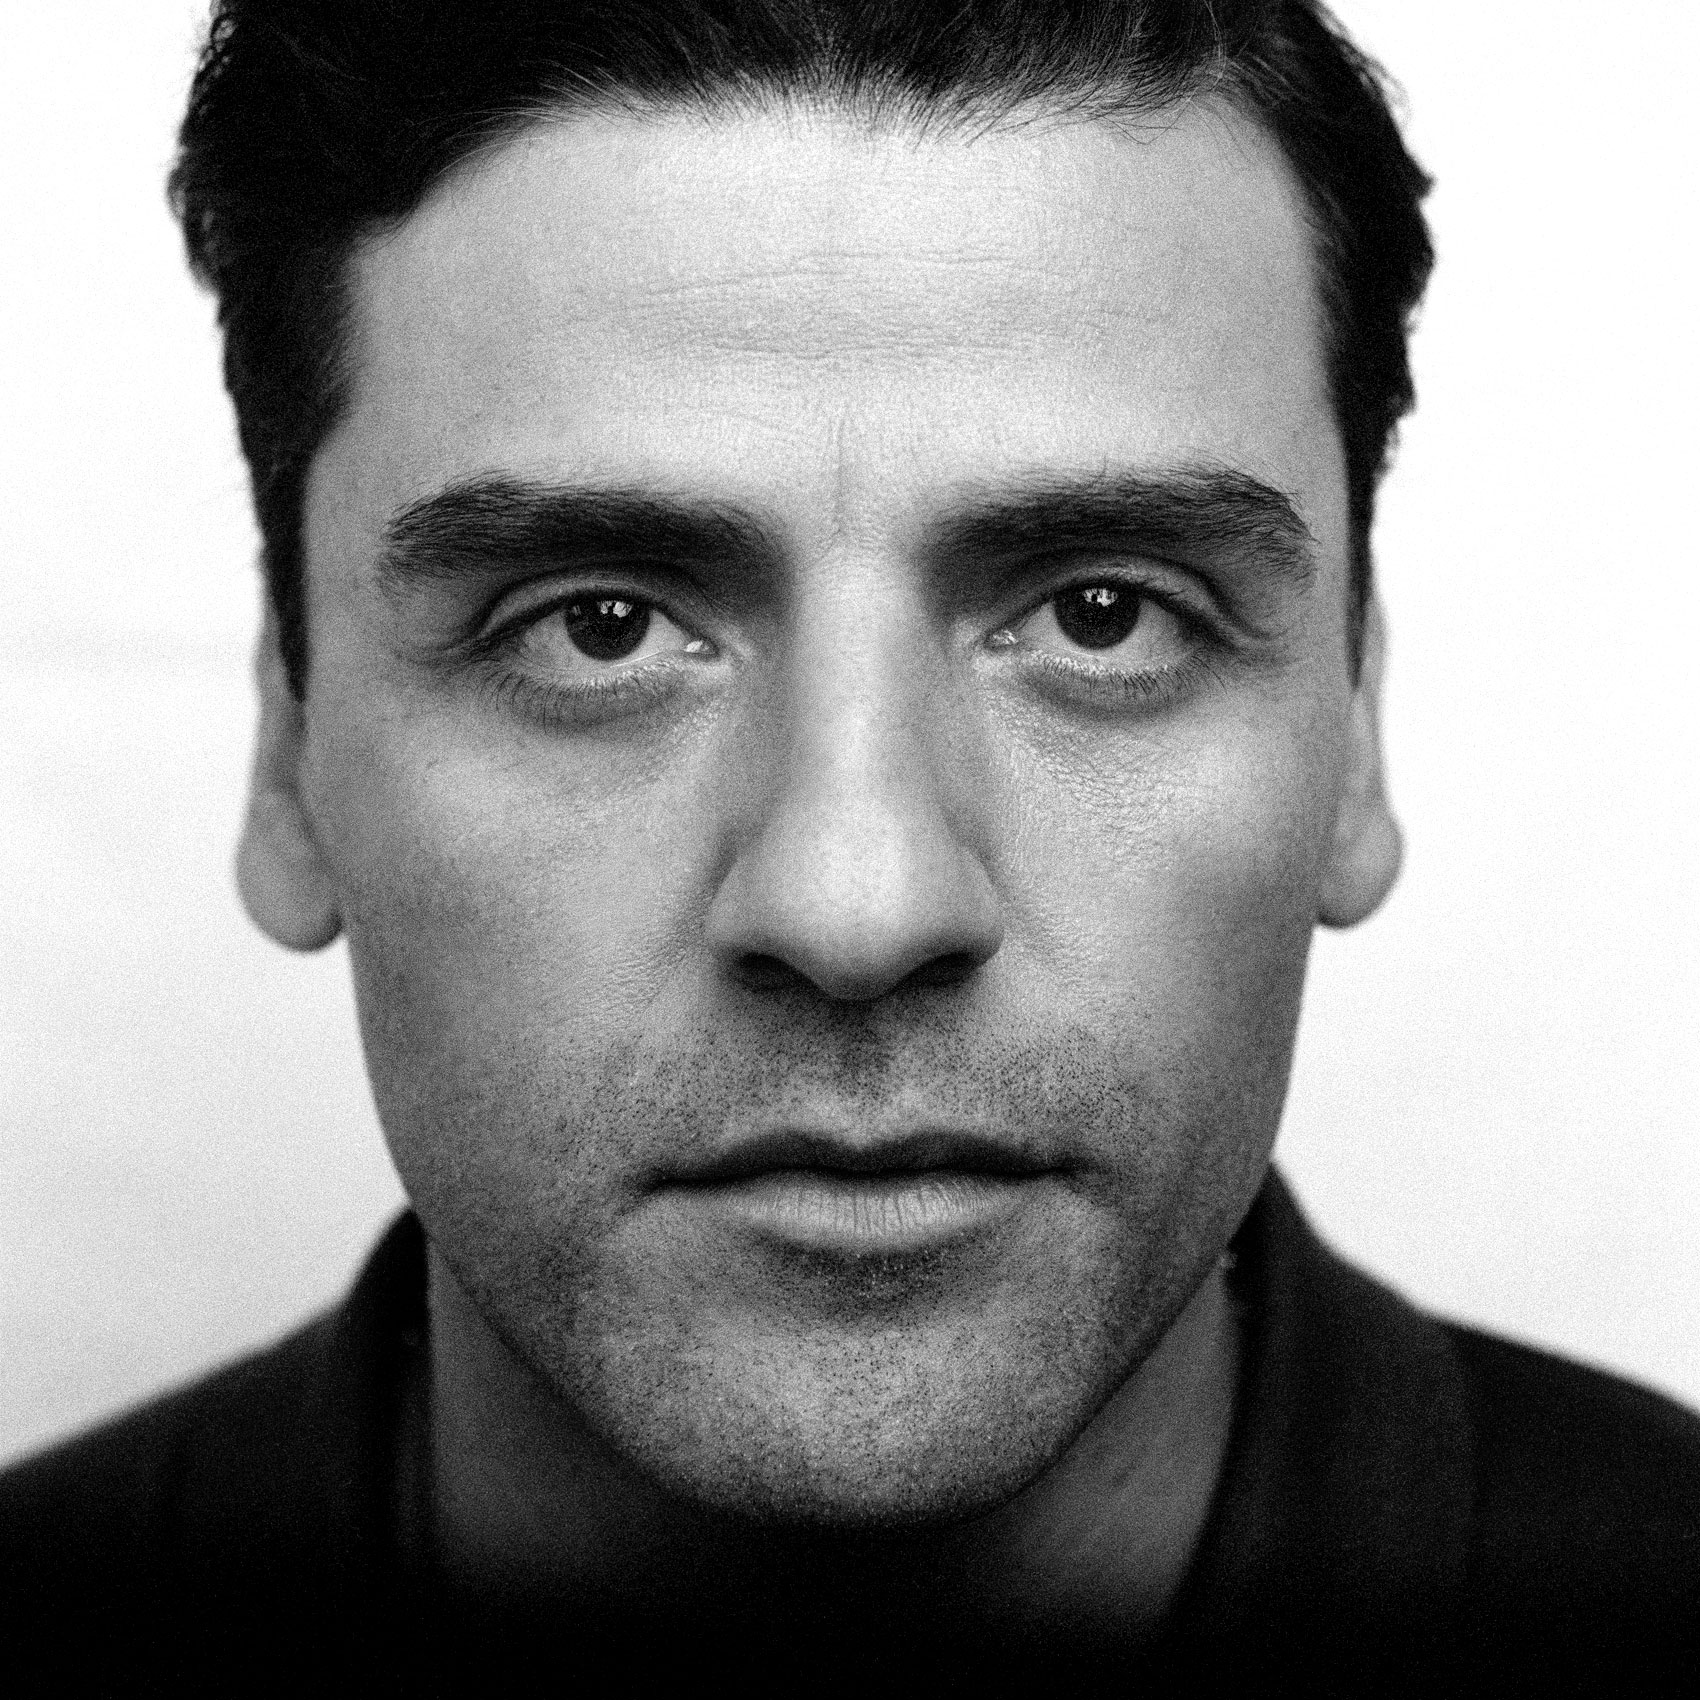 Oscar Isaac, who is a part of the LA Times Drama Actor Roundtable Photo by Jesse Dittmar / For The Times